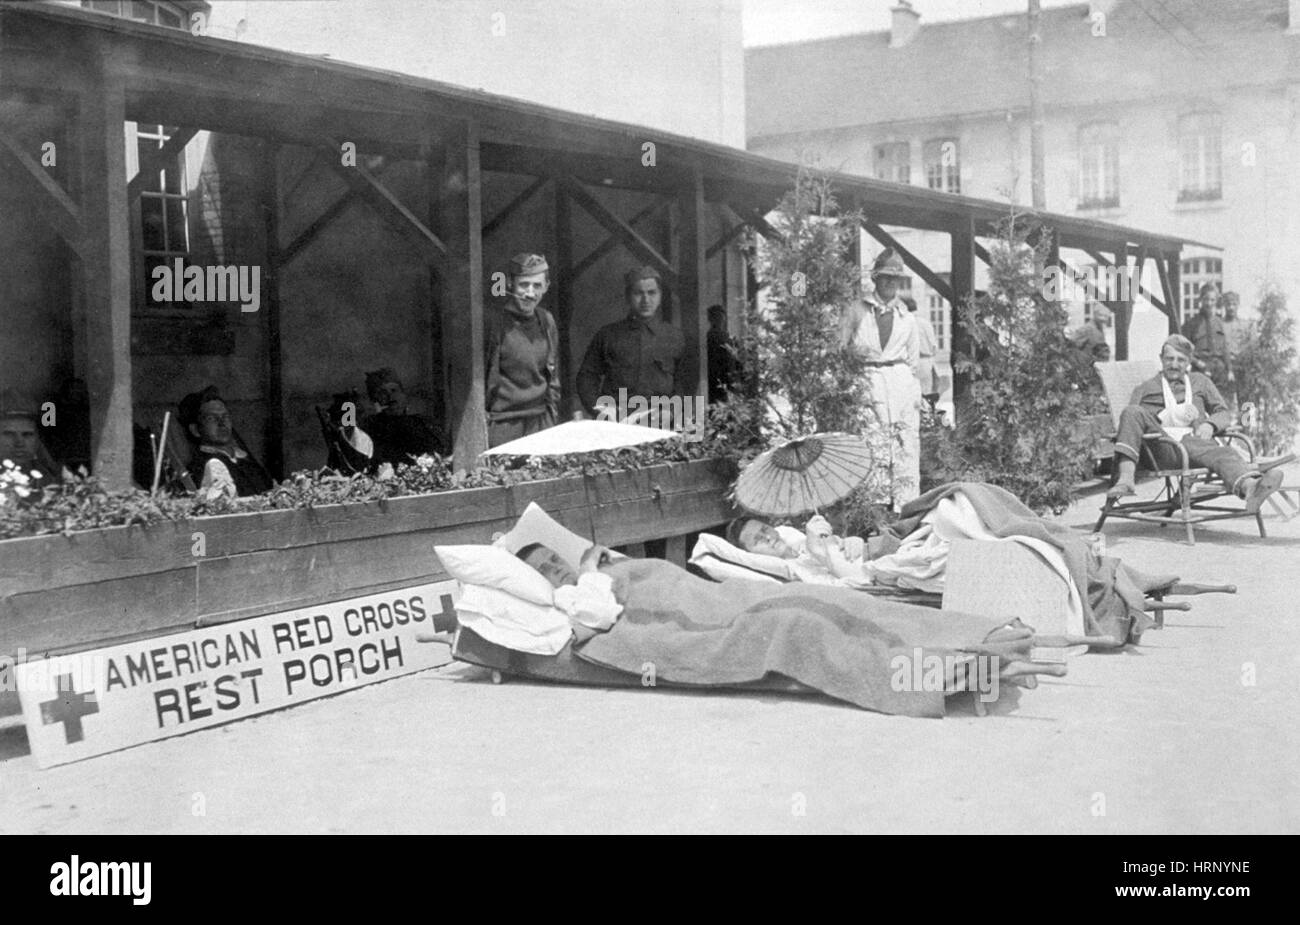 WWI, American Red Cross Rest Porch Stock Photo